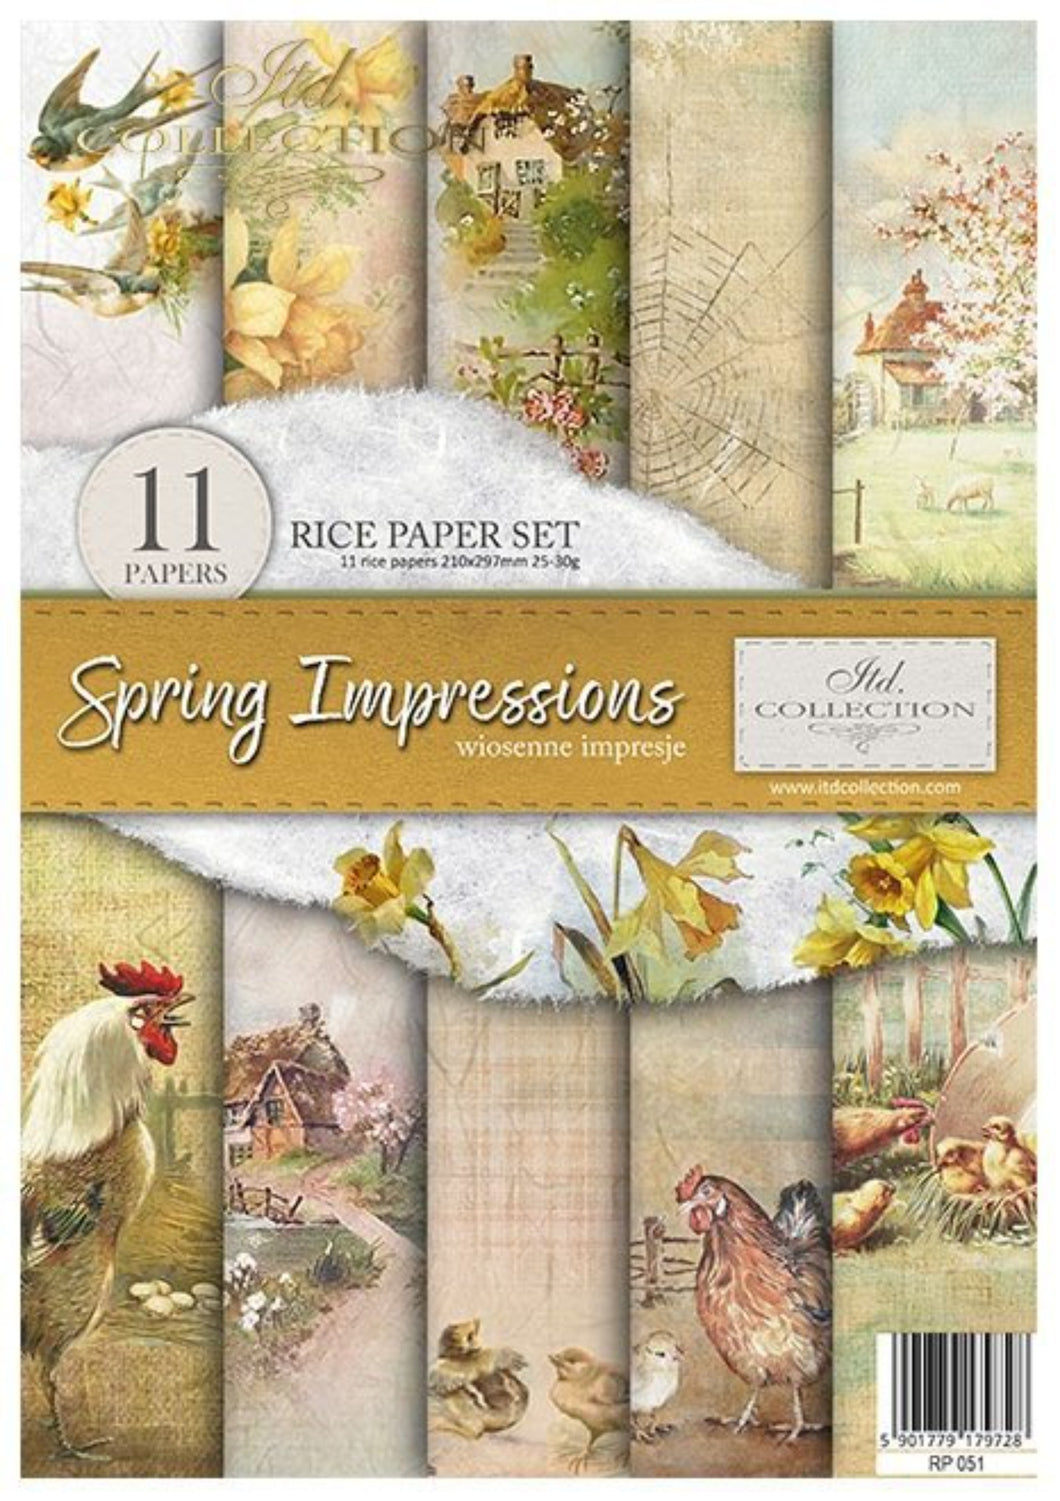 Spring Inspiration Rice Paper Set by ITD Collection, RP051, Pack of 11 Cover